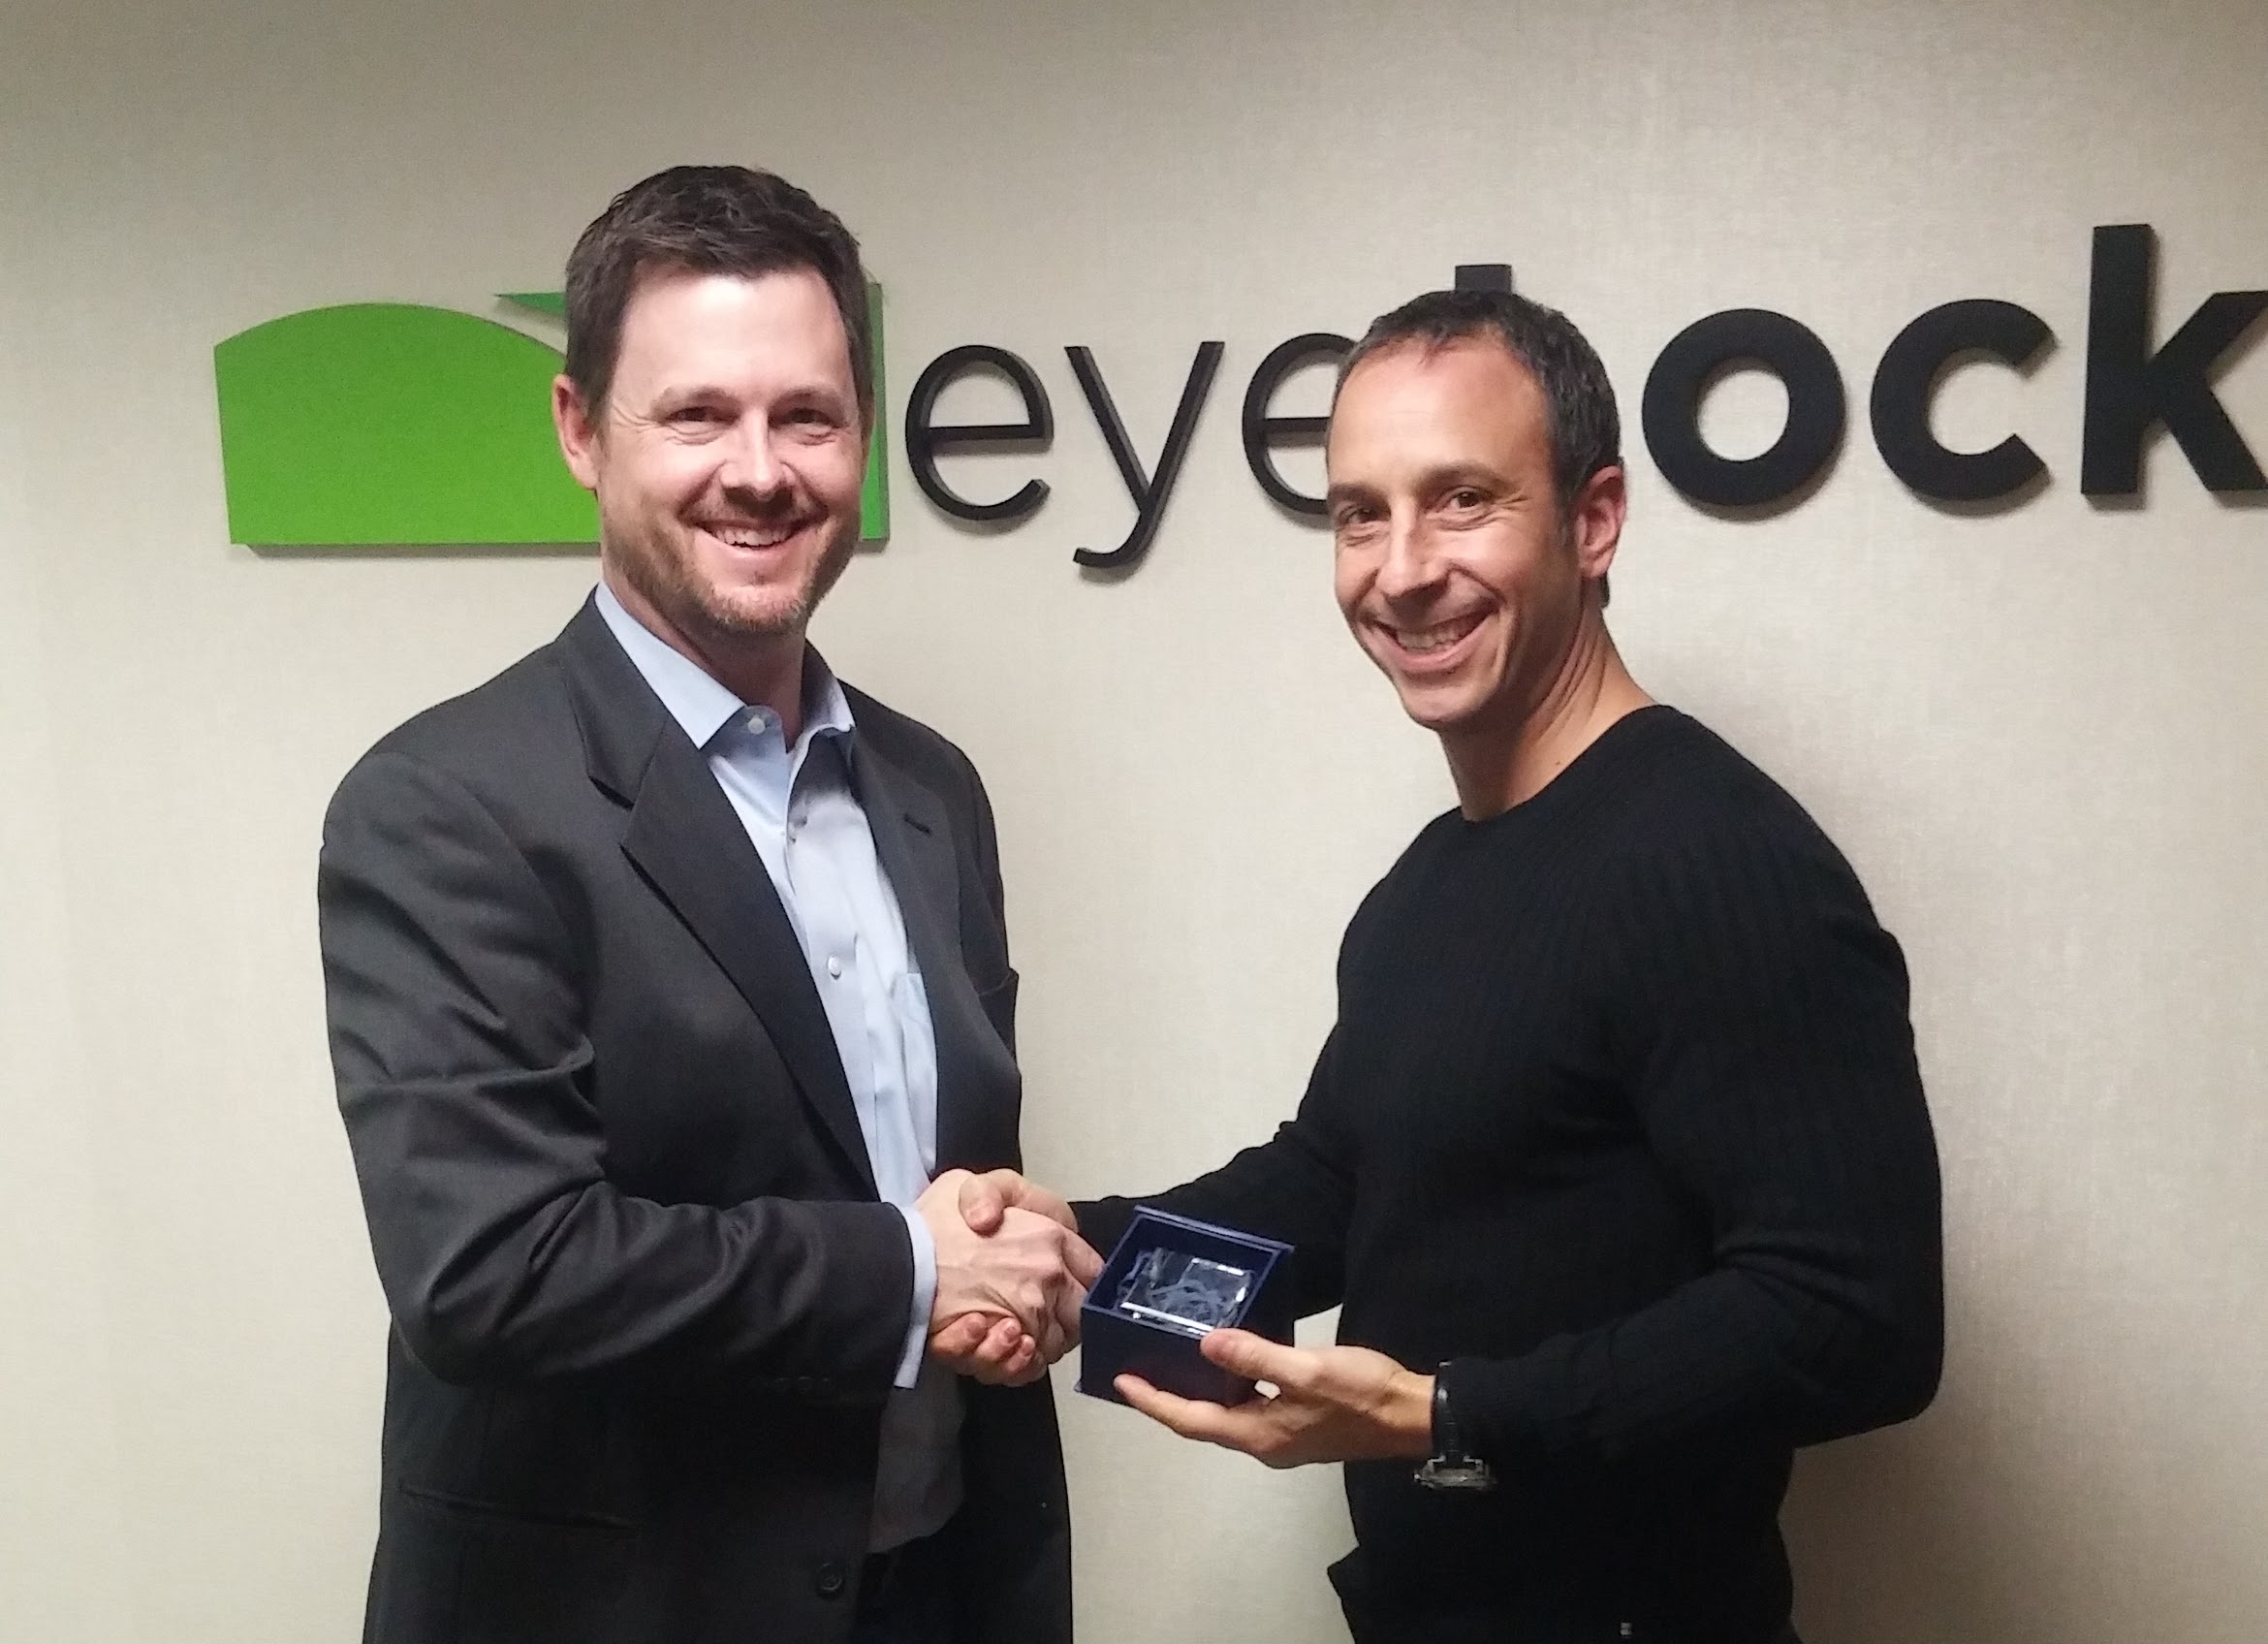 Eyelock Chief Marketing and Business Development Officer Anthony Antolino (R) accepting his 2016 BIG Innovation Award from Business Intelligence Group Managing Director Russ Fordyce (R) in New York Ci